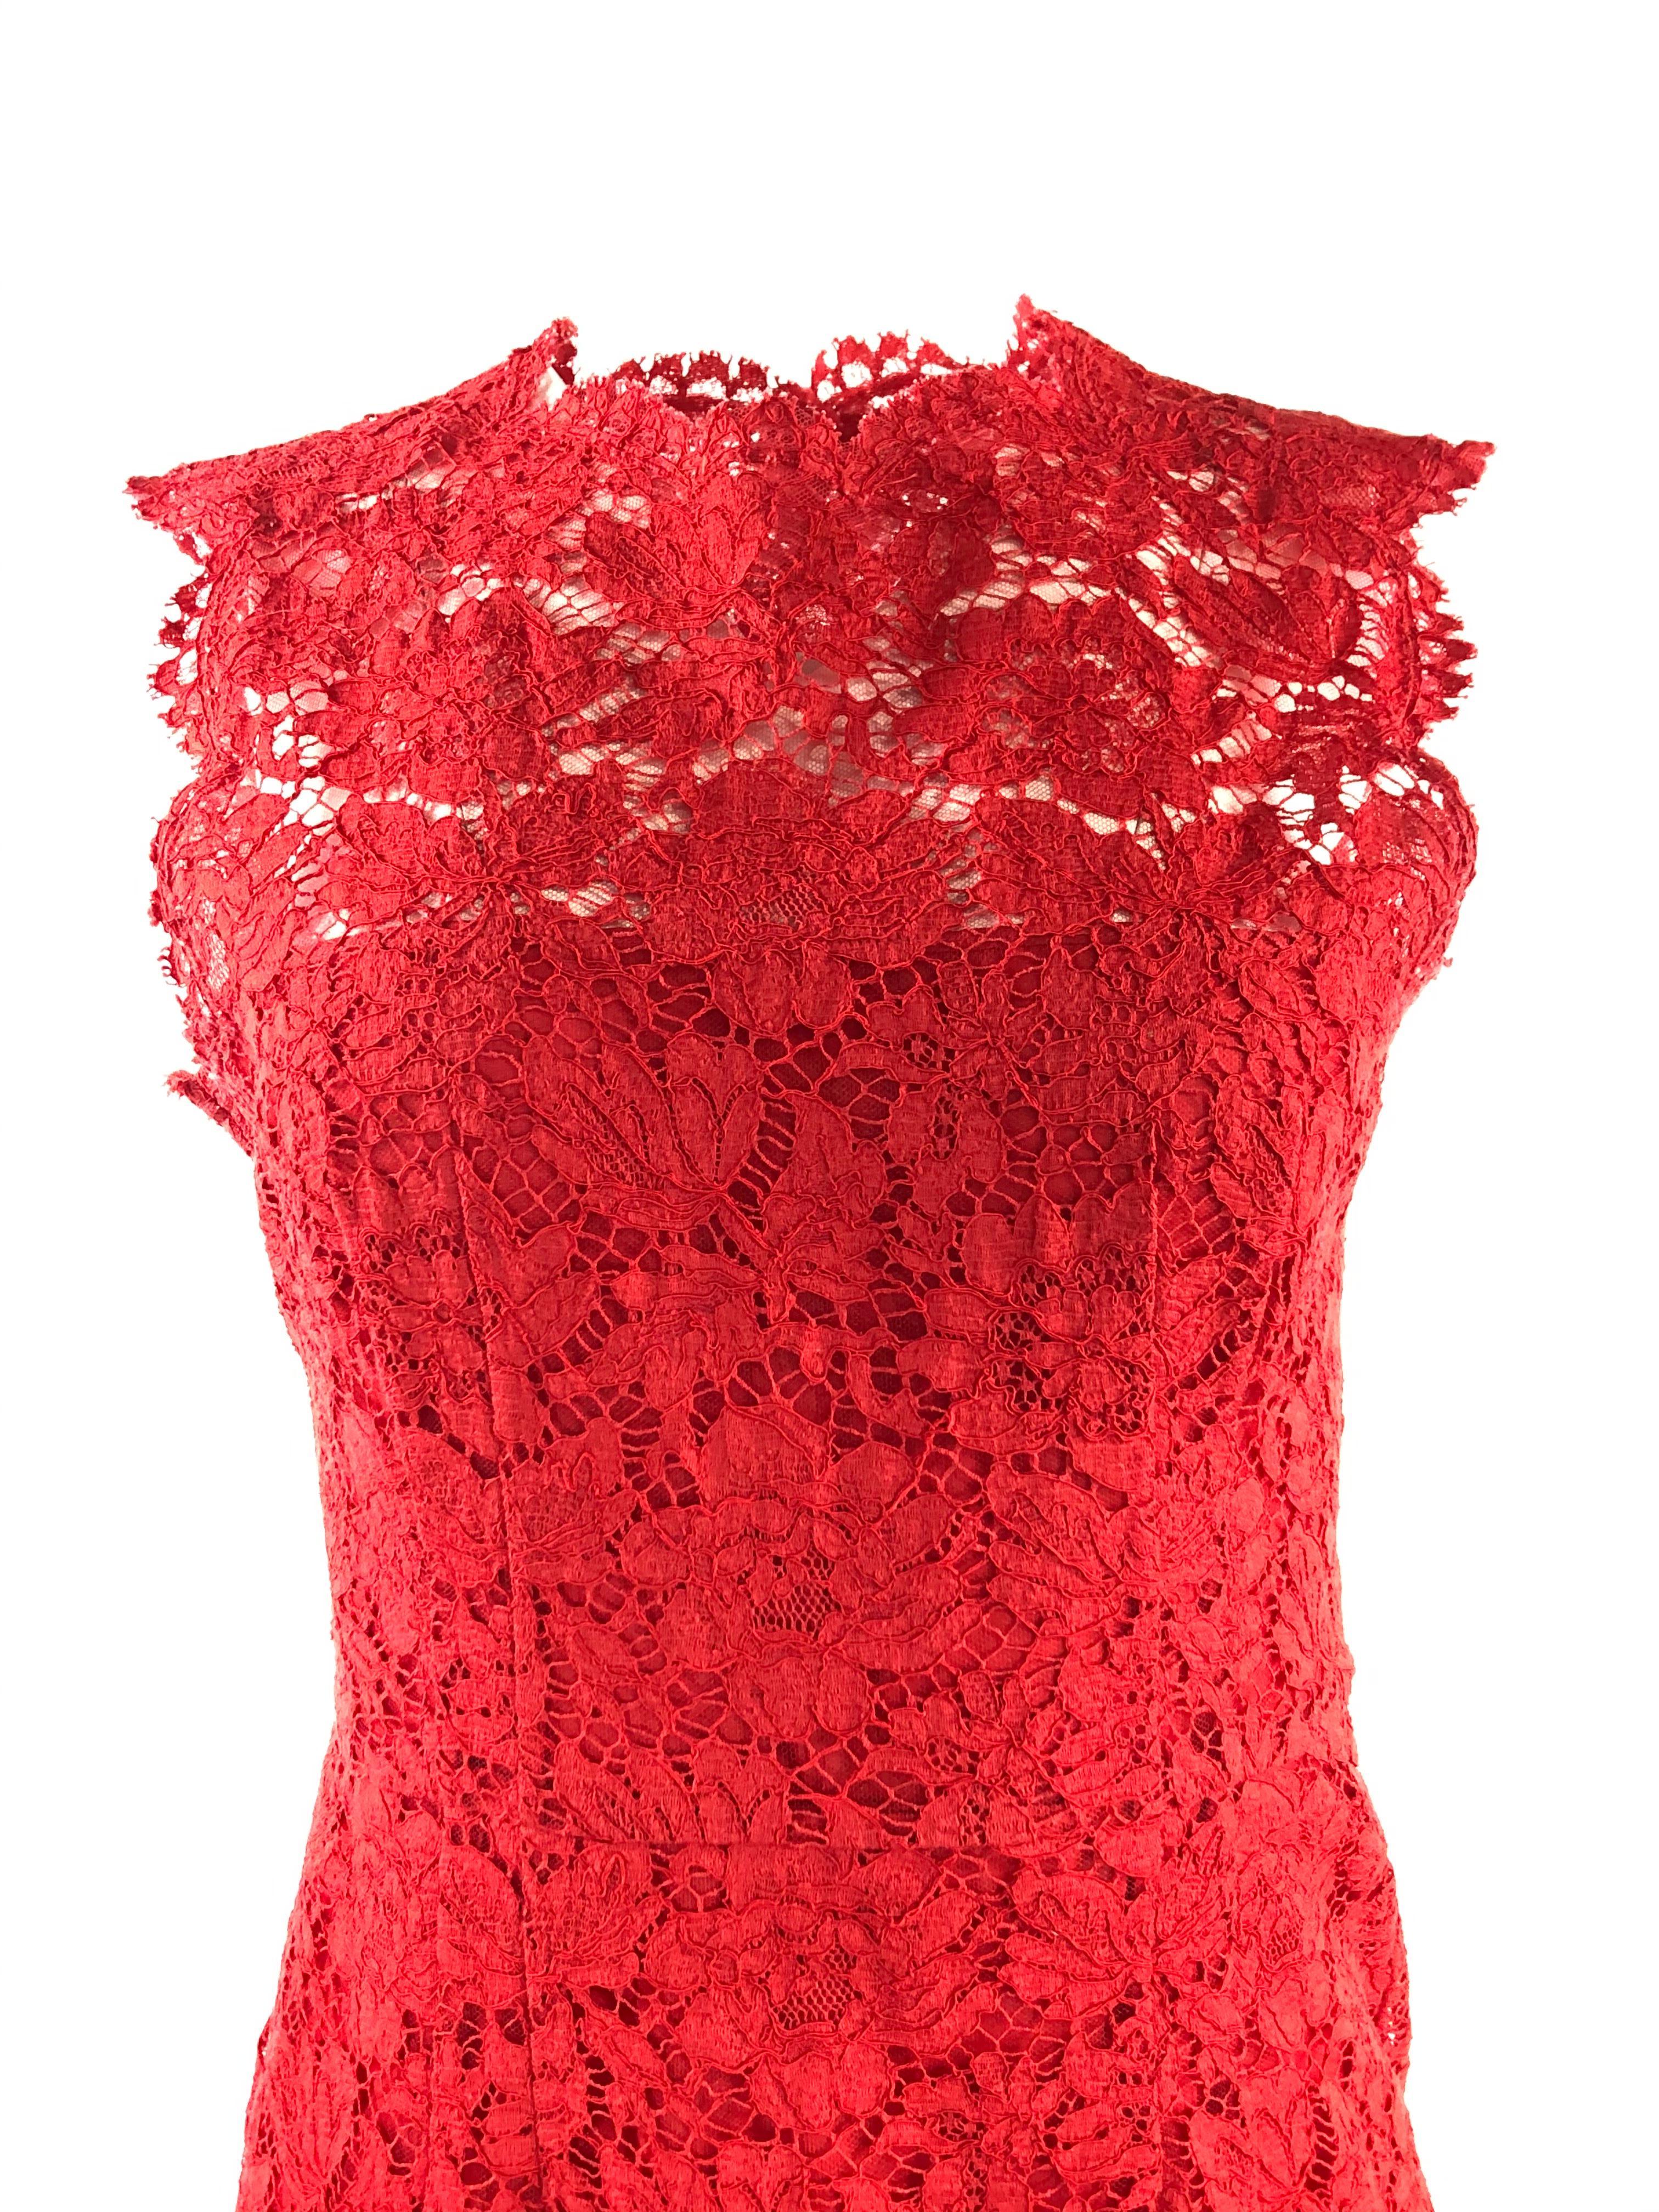 Red VALENTINO Floral Lace Sleeveless Midi Dress Size US6

Product details:
Size US 6
Red floral lace 
77% Cotton 17% Viscose 6%Polyamide
Bow detail on the back
Concealed rear zip 
Made in Italy
